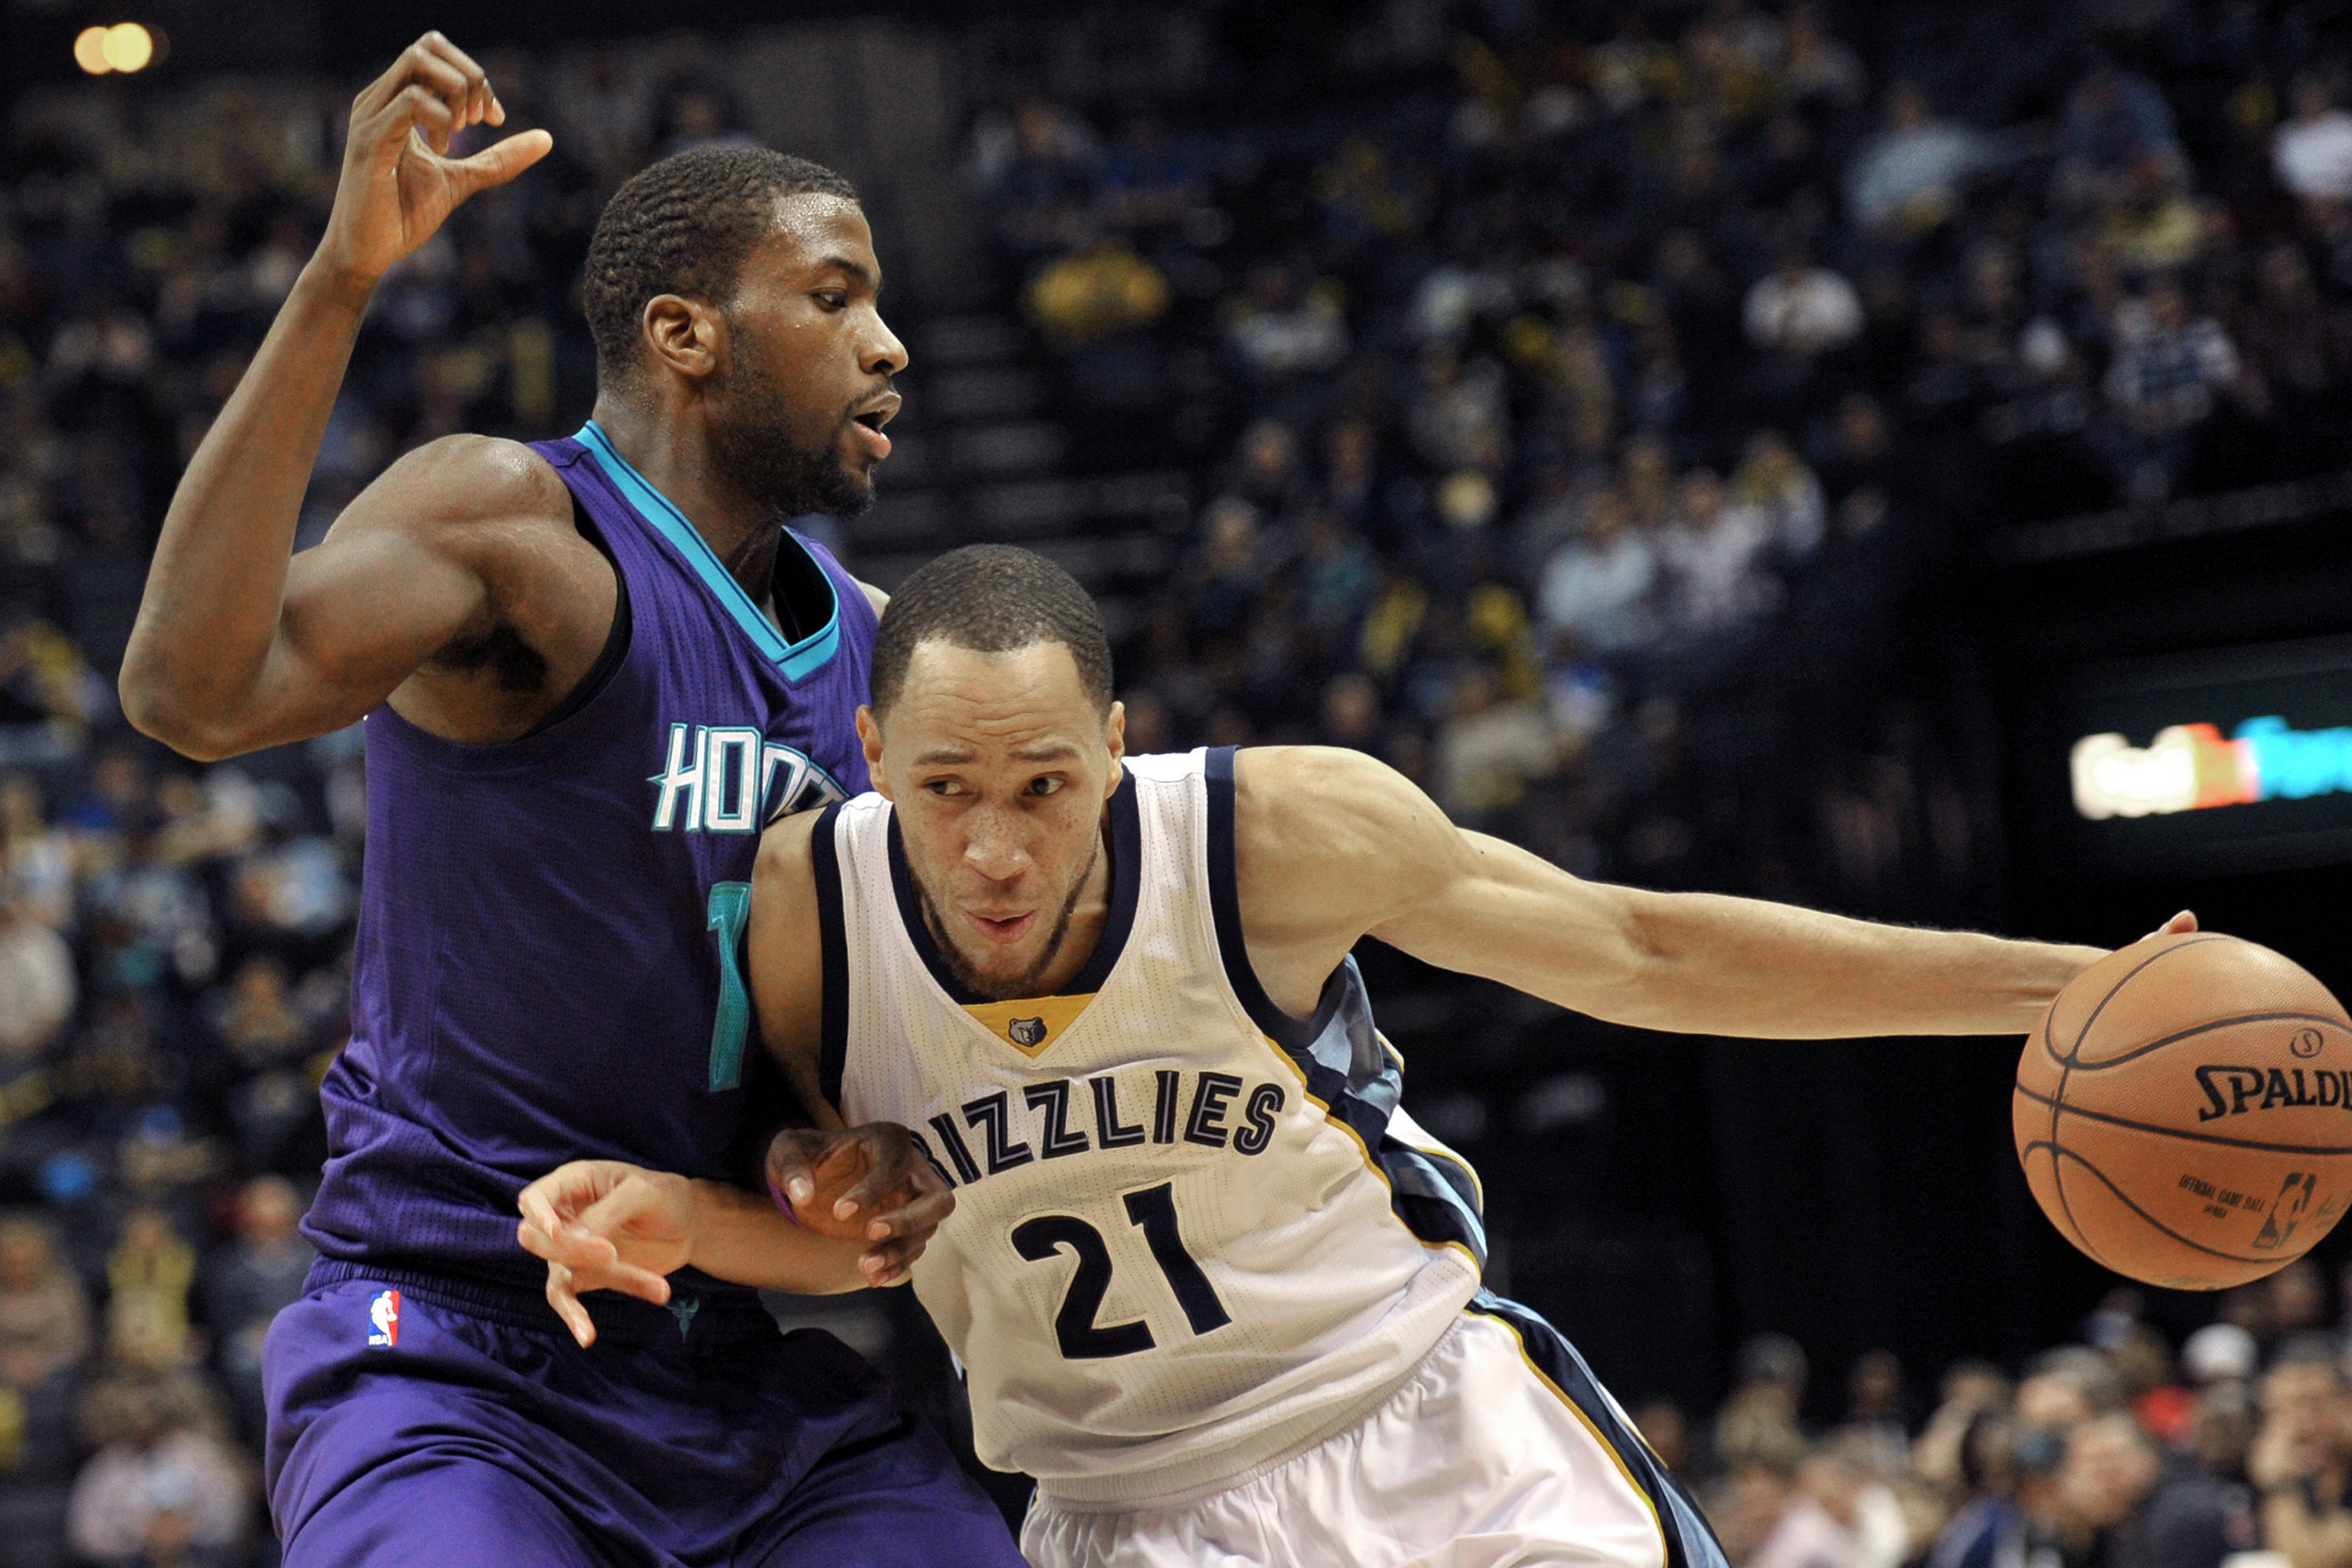 Tayshaun Prince hired by Grizzlies for front office job - Detroit Bad Boys